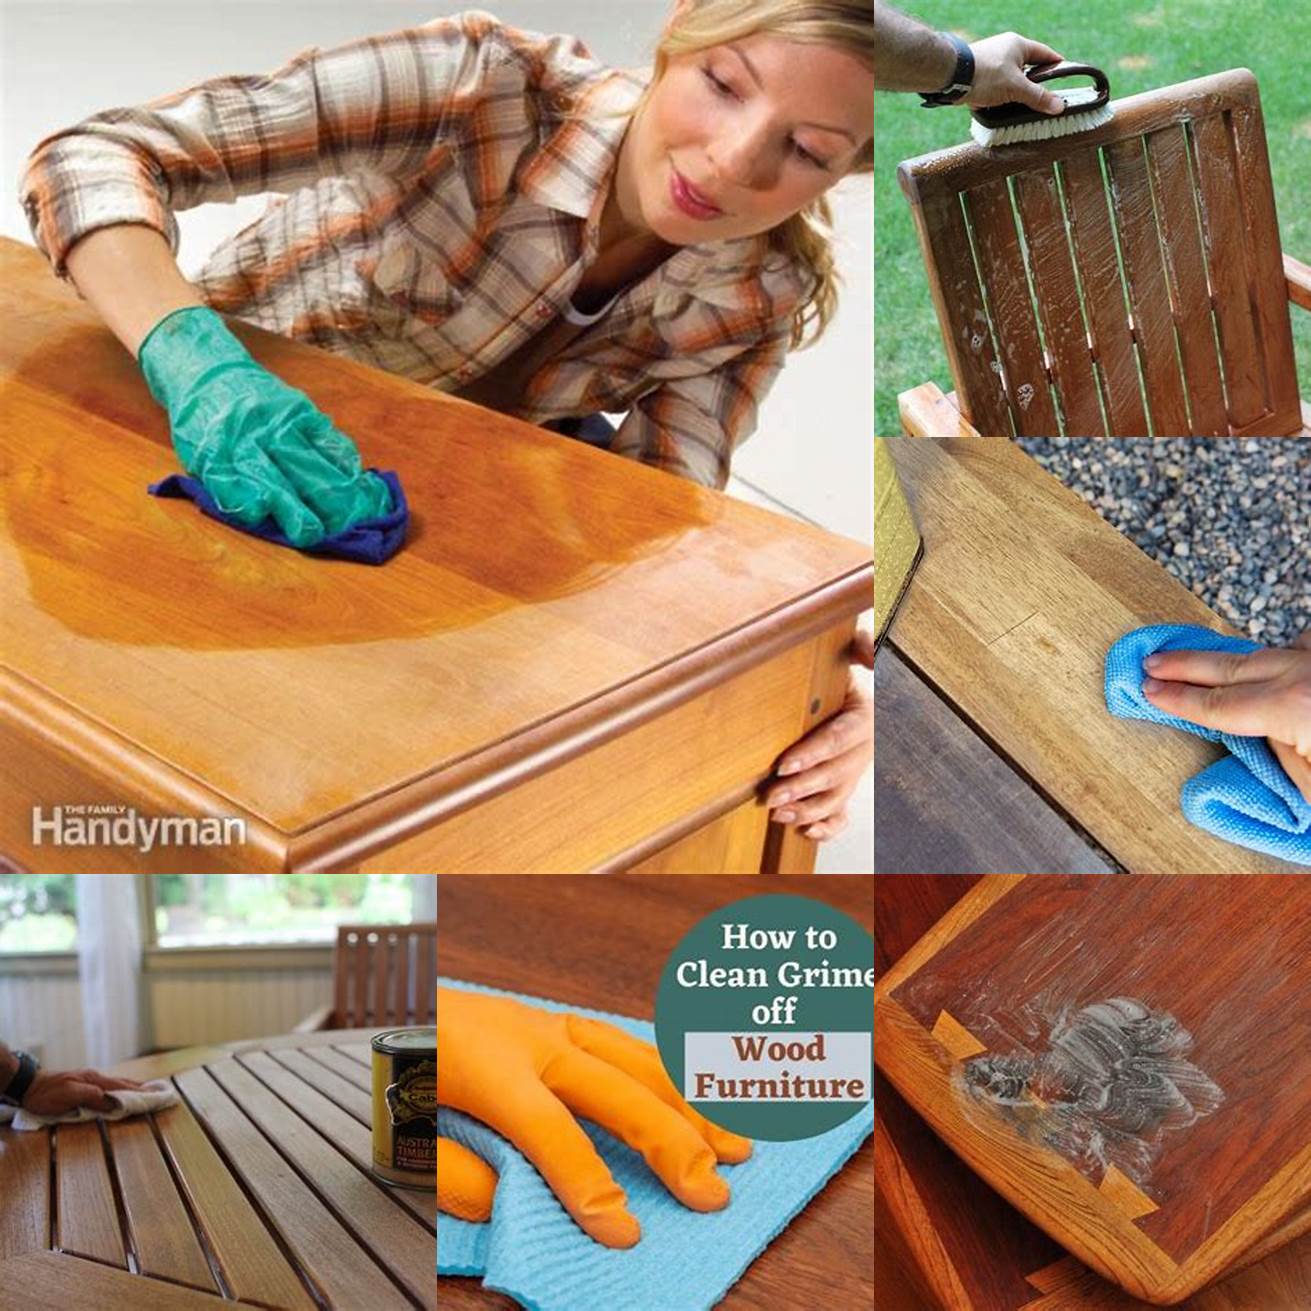 Removing dirt and grime from teak furniture